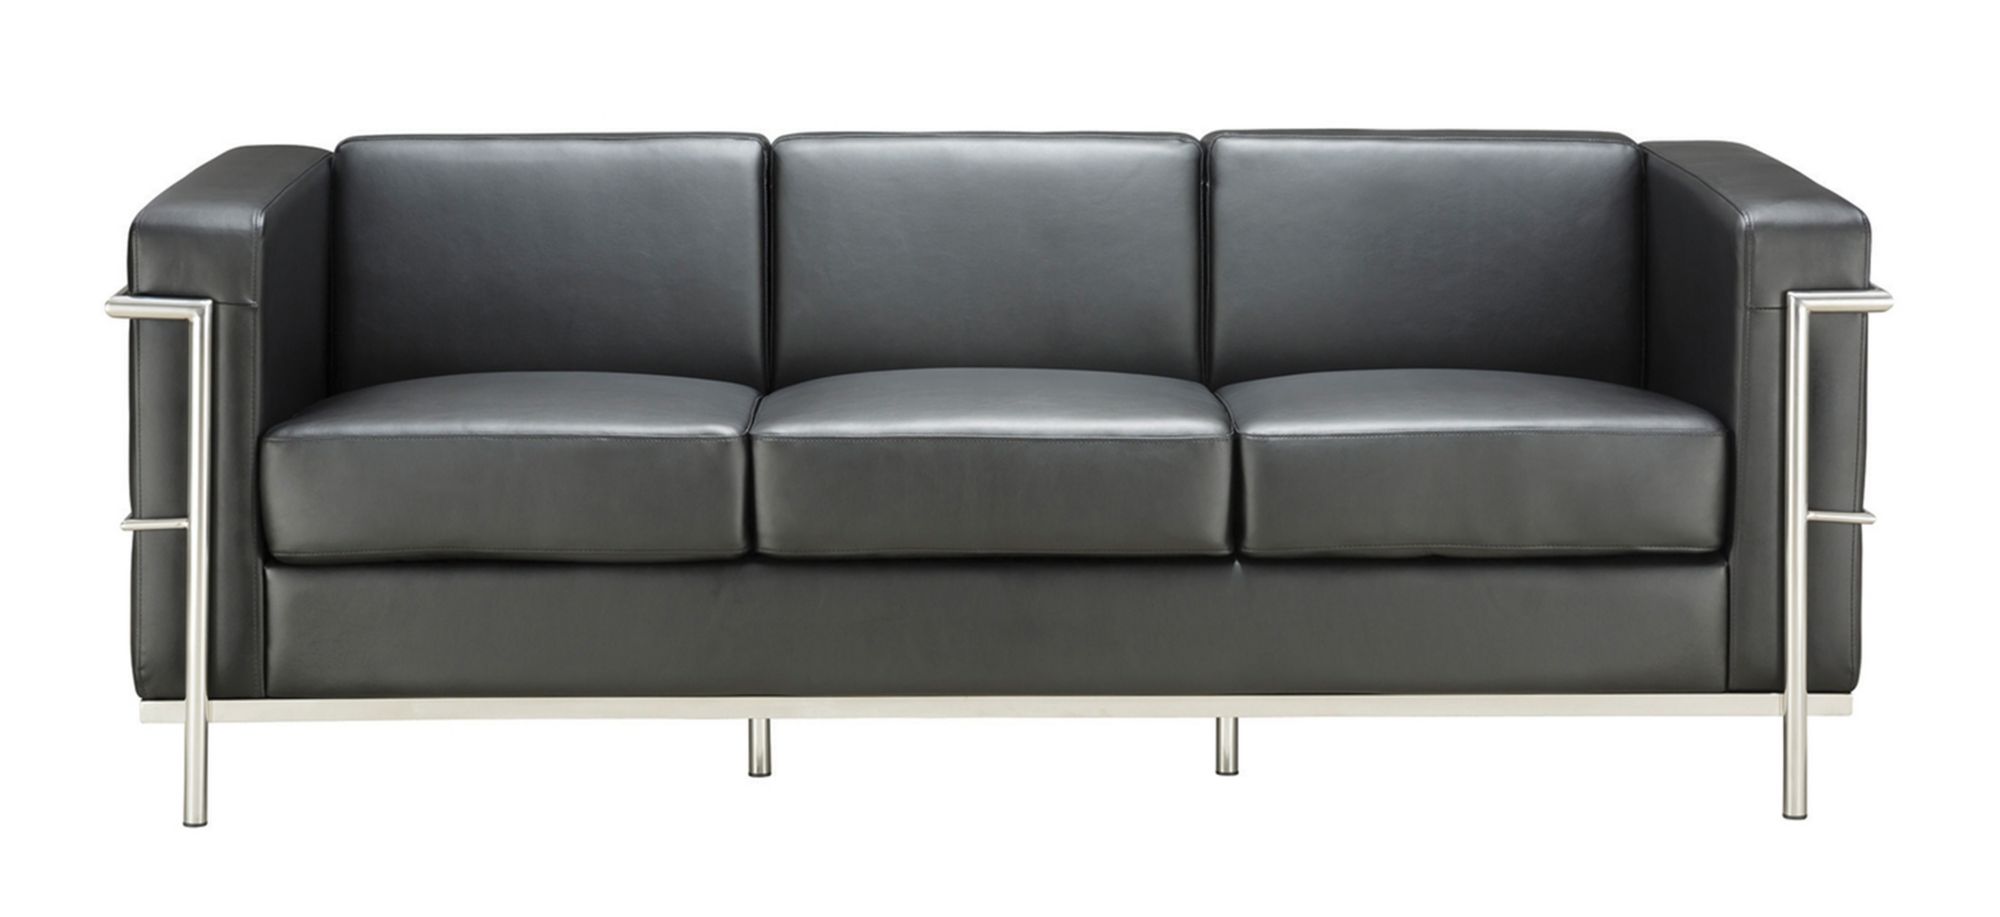 Gibeault Sofa in Light Gray Antimicrobial Vinyl; Silver by Coe Distributors